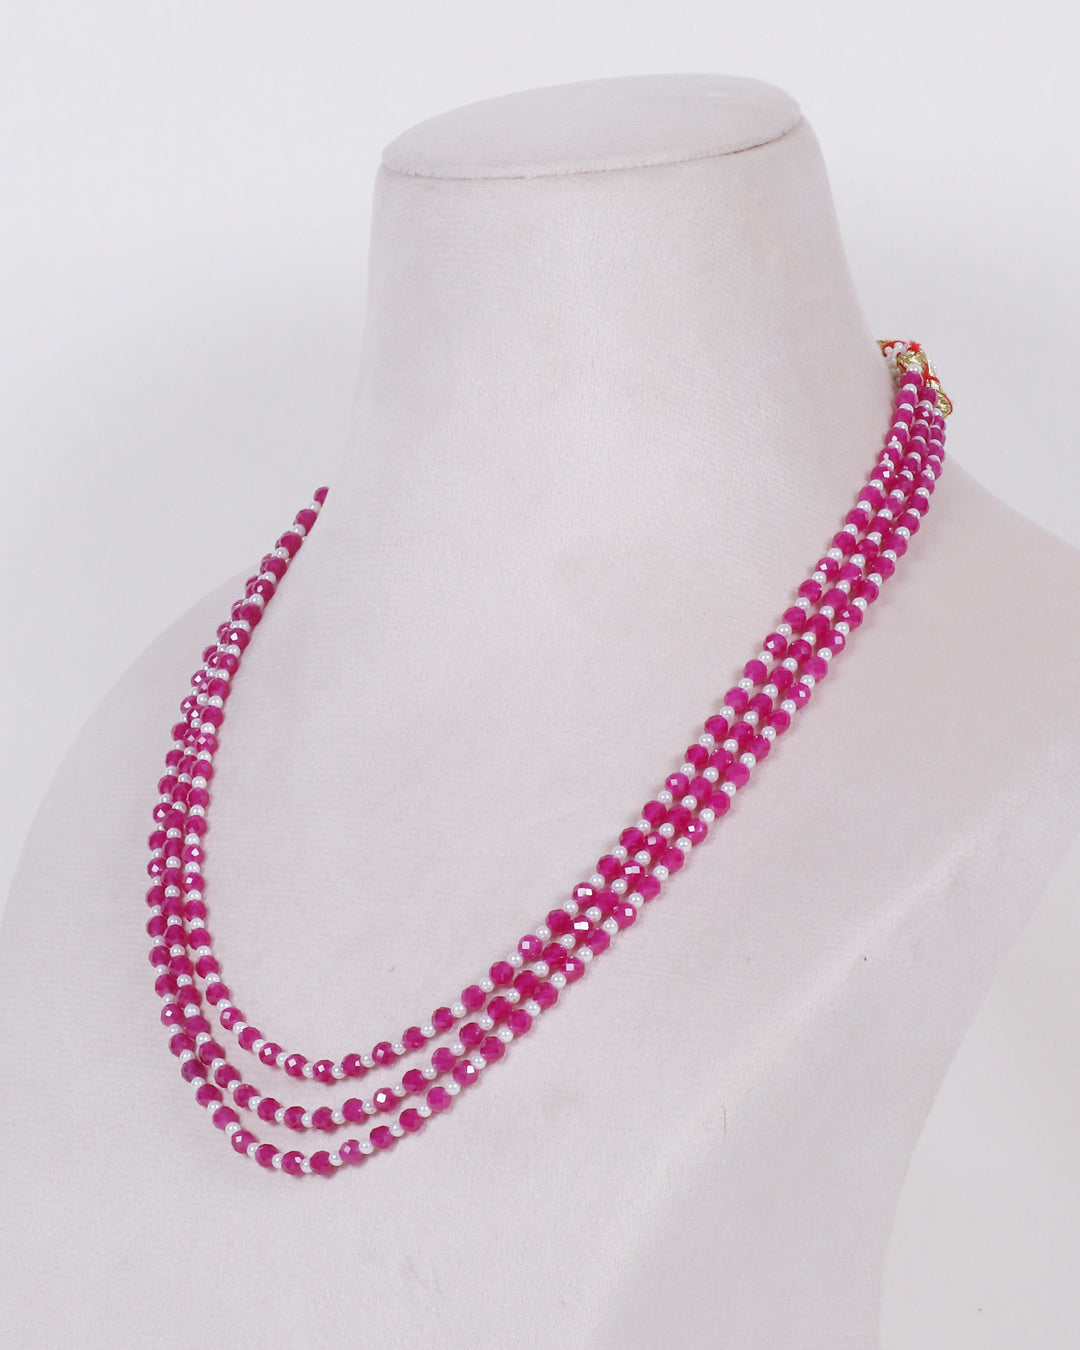 Pink Ruby & Pearl Gemstone Beads Necklace Imitation